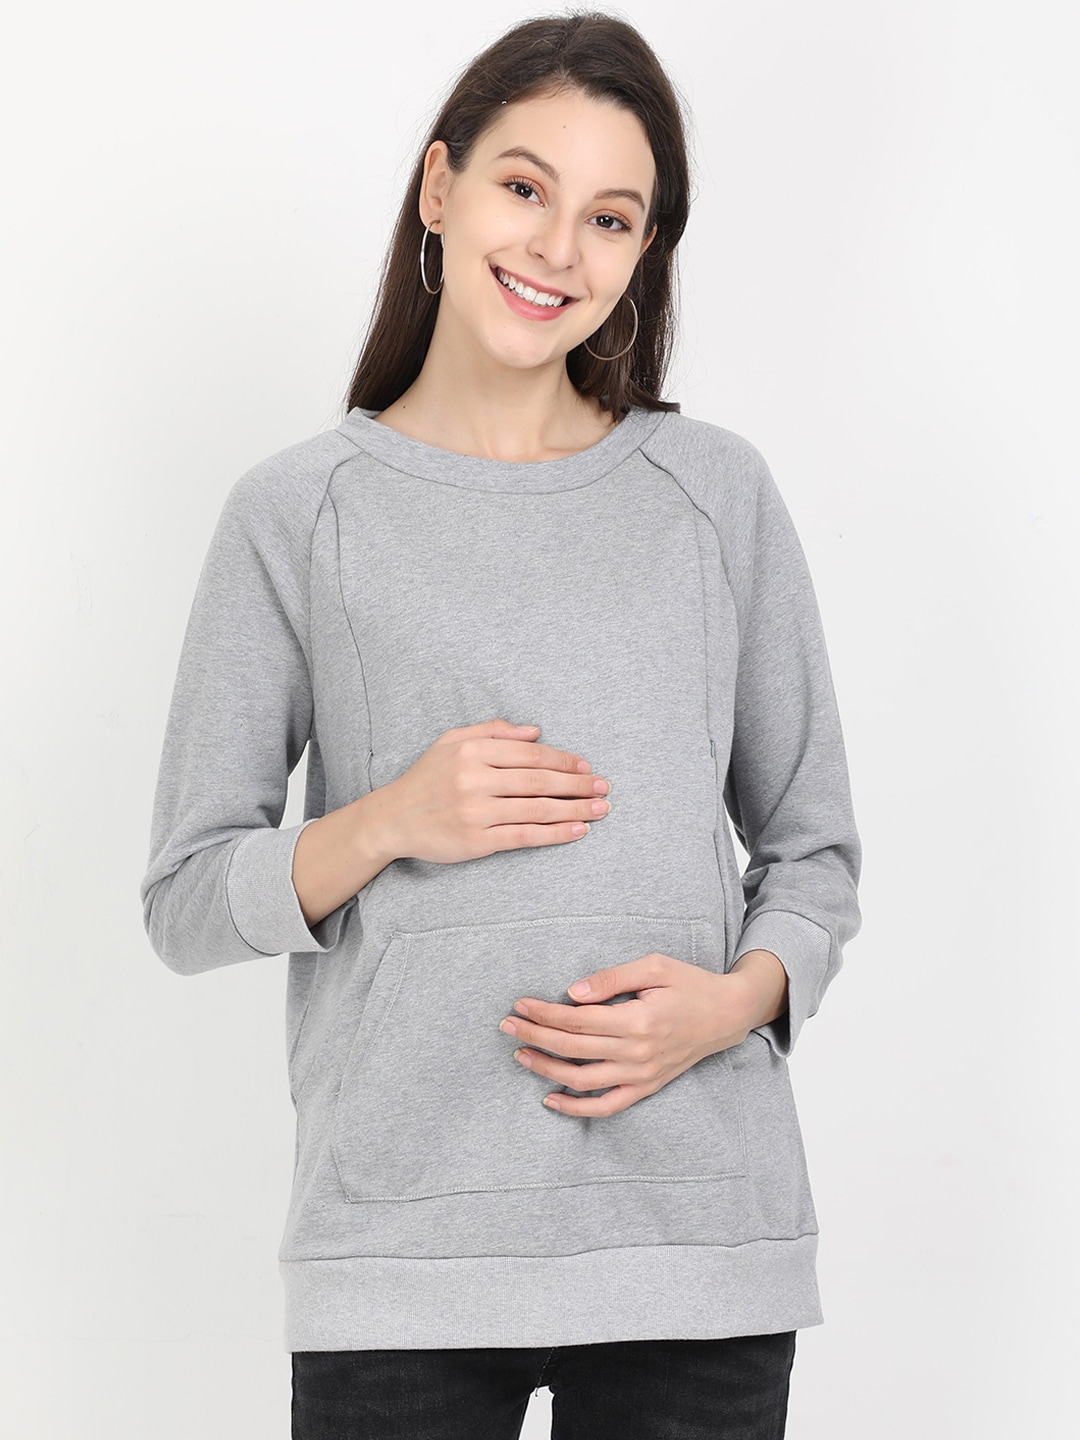 The Mom Store Maternity Women Grey Solid Sweatshirt Price in India